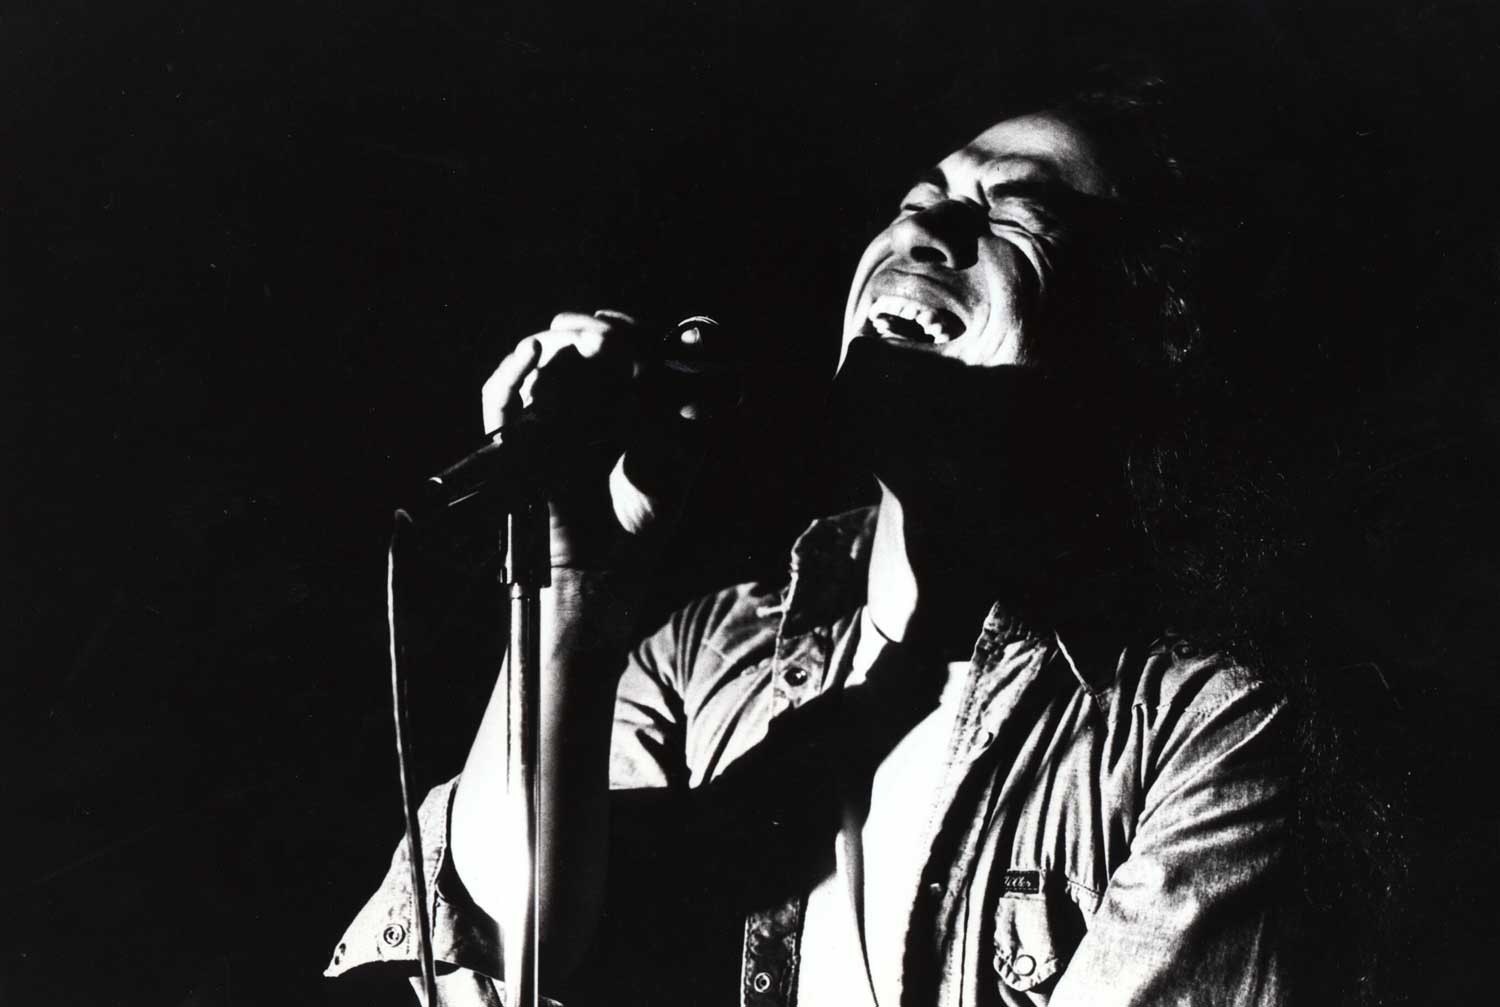 Leo de Castro passes away, “probably the most electrifying vocalist I’ve ever heard”